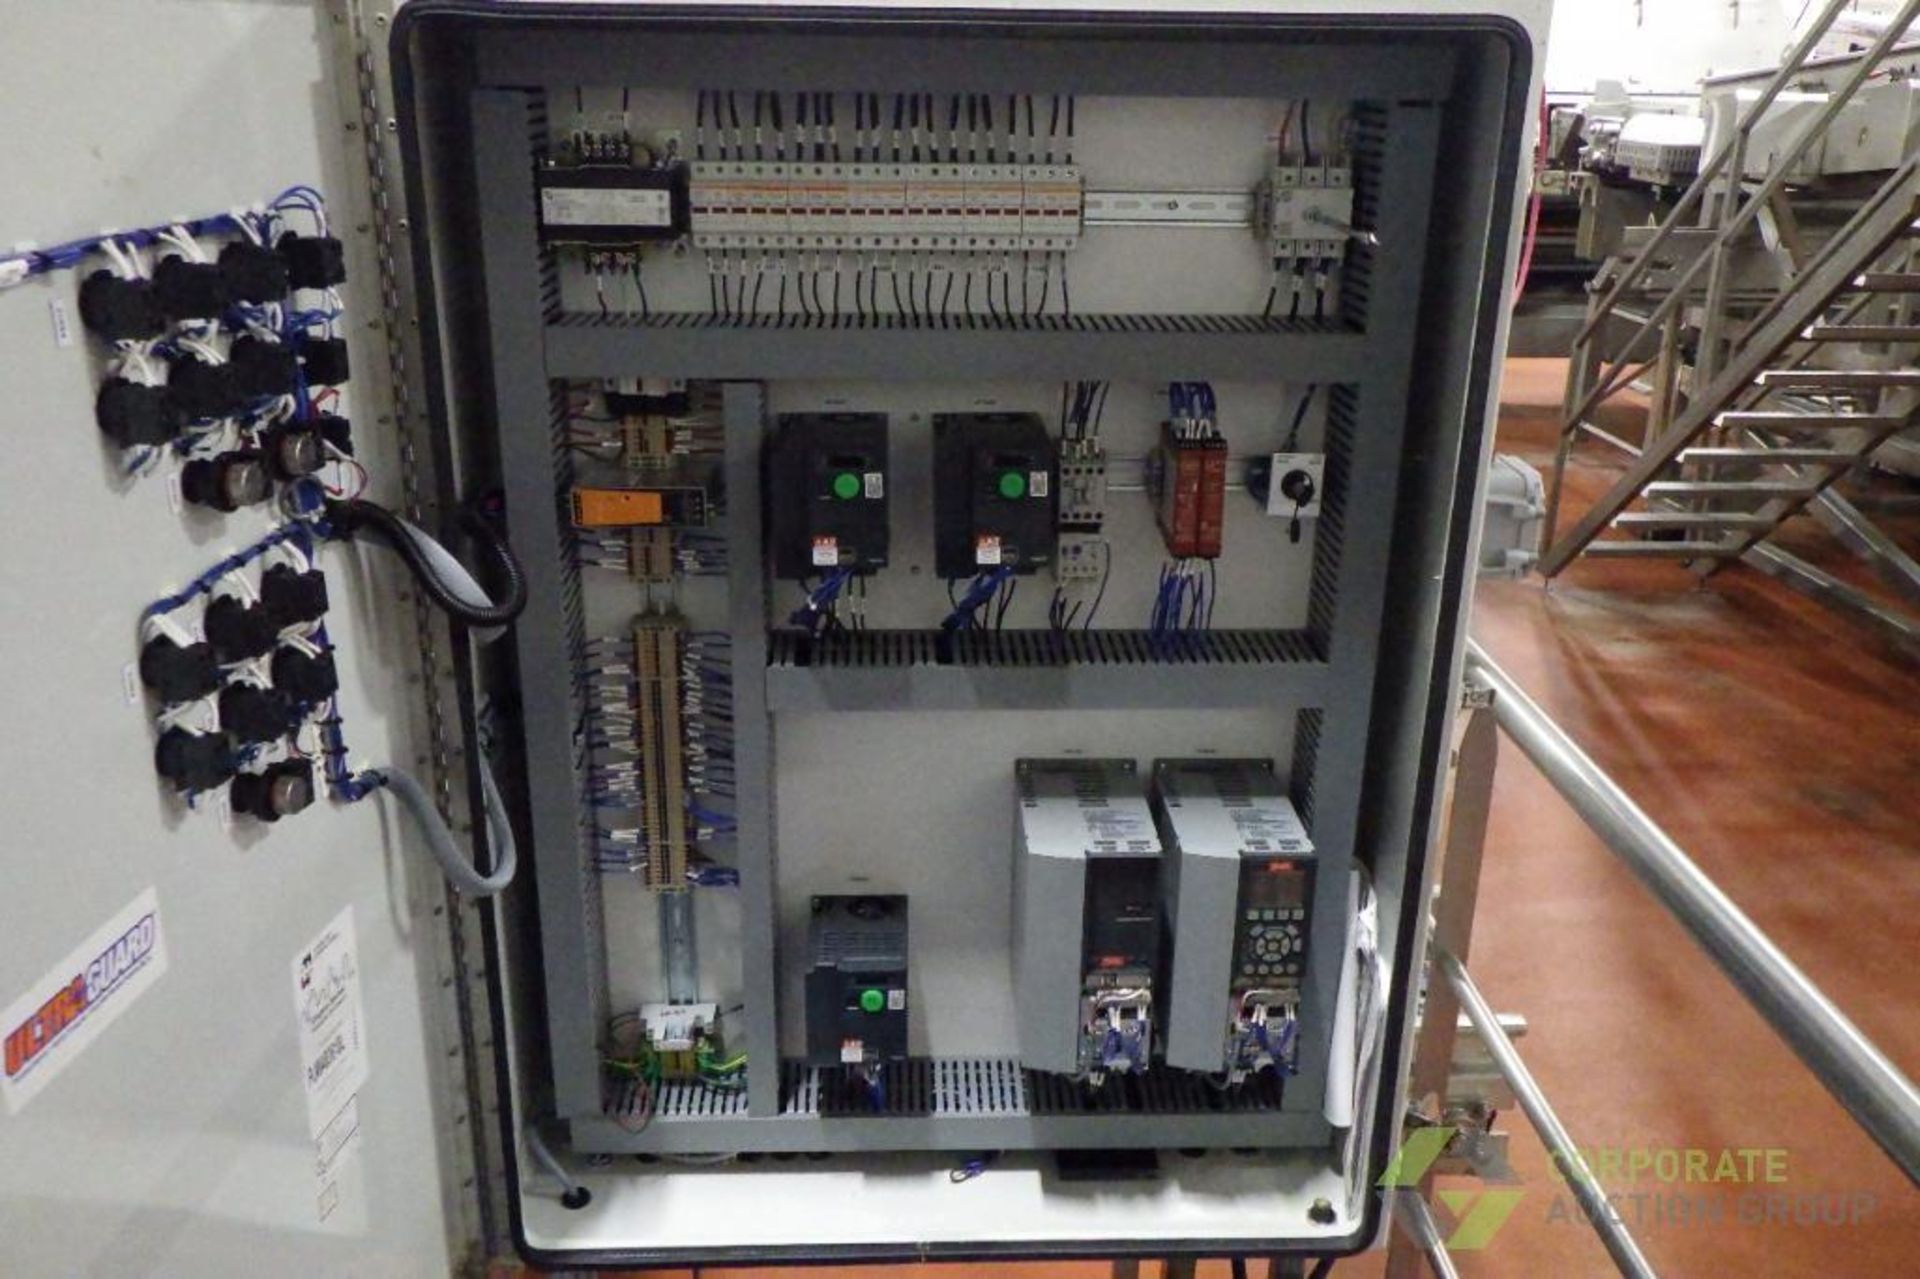 Inspection system control panel - Image 4 of 9